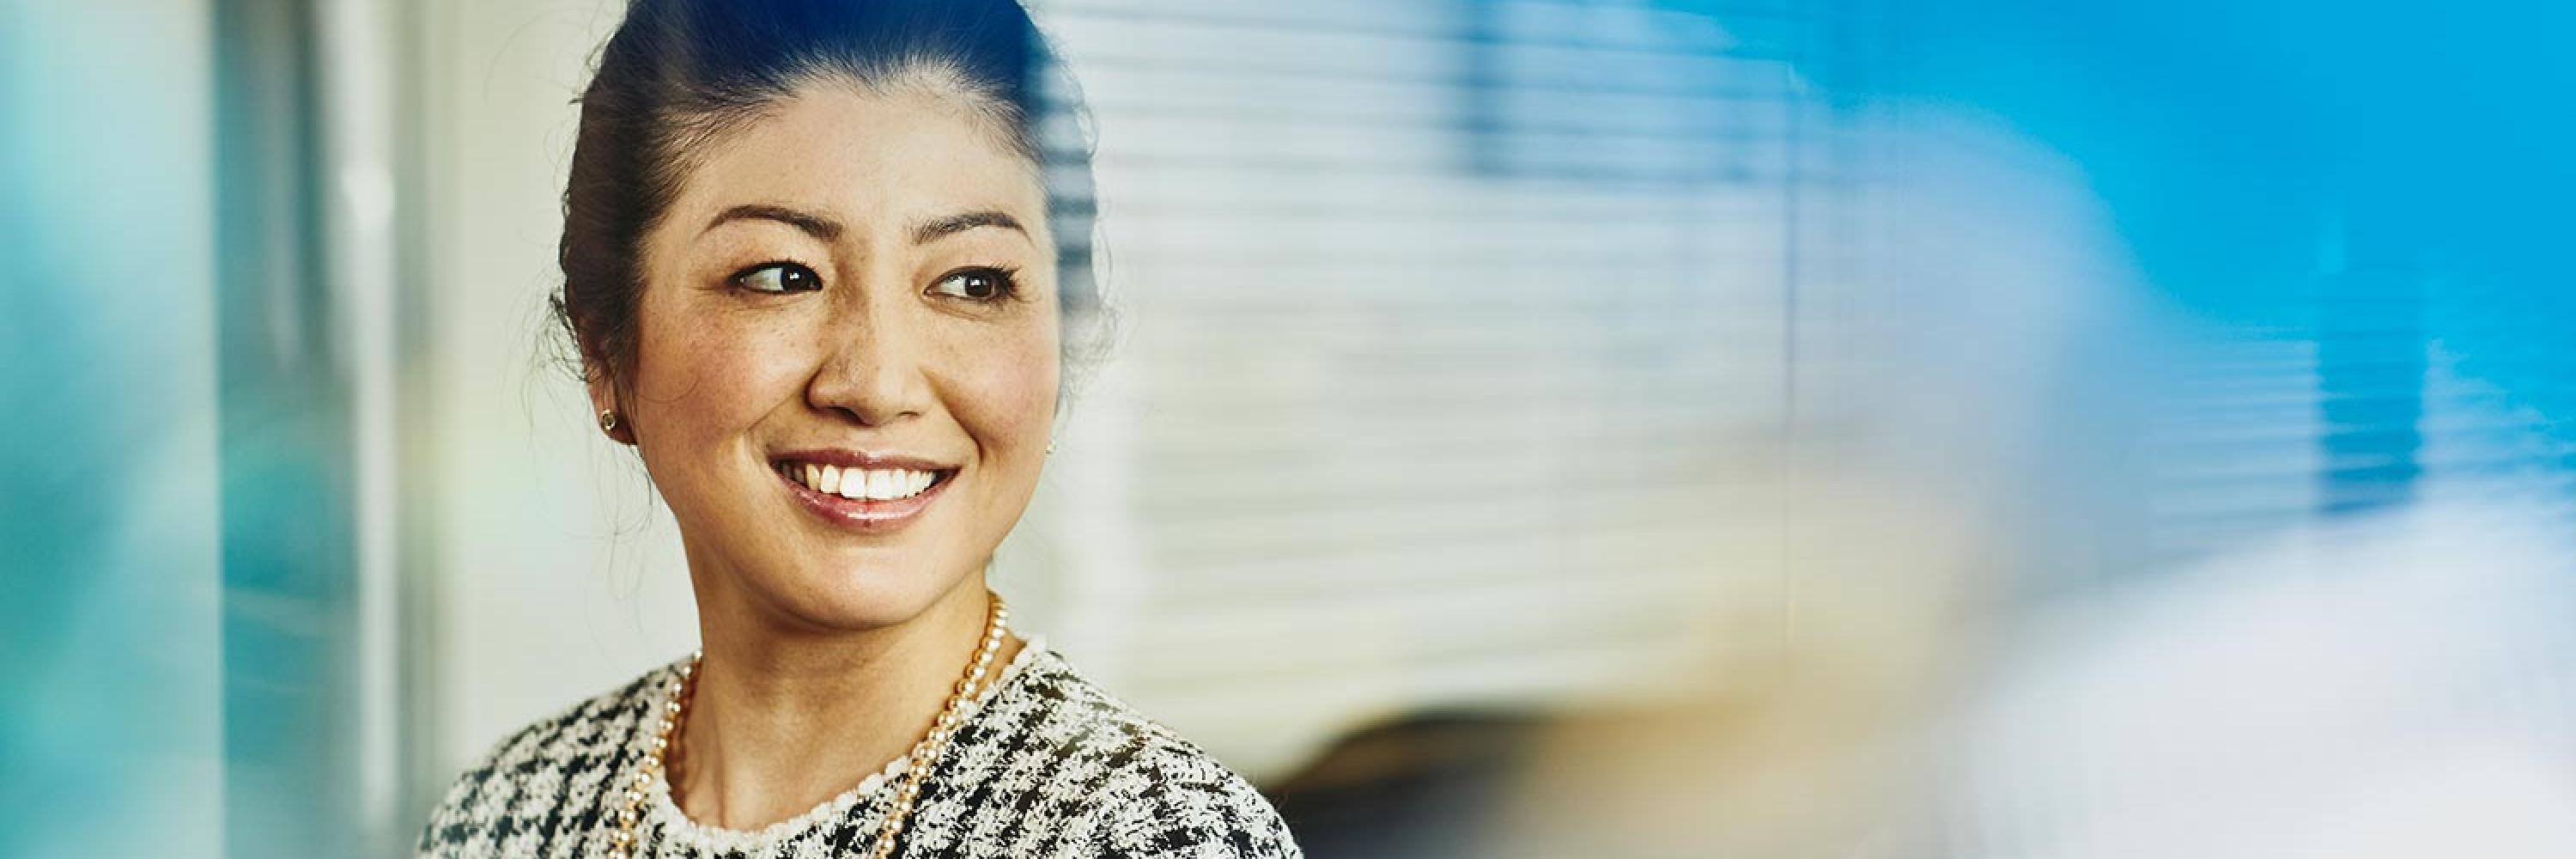 woman in corporate outfit smiling